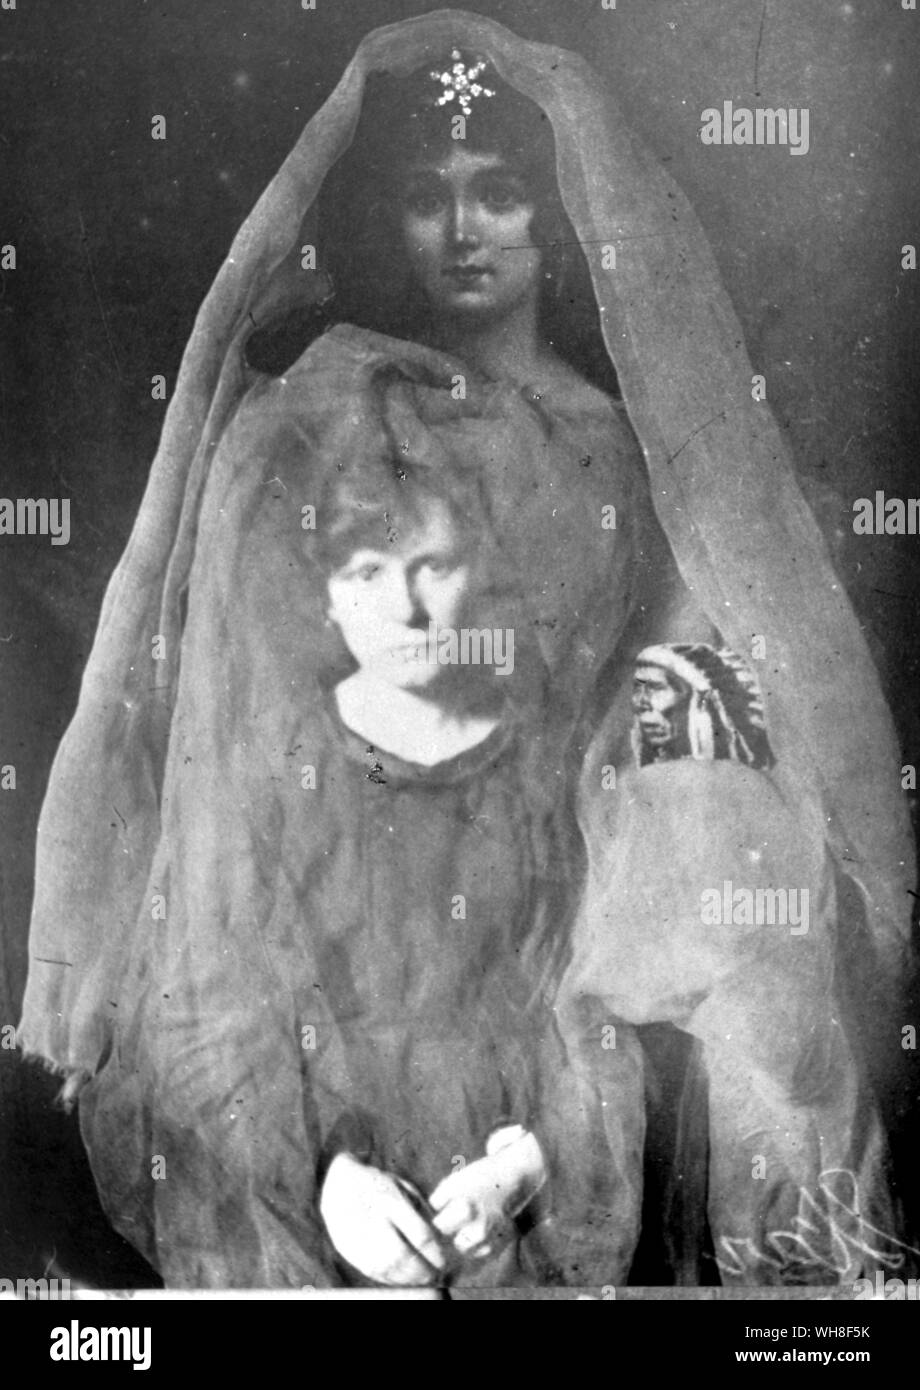 Claimed to be a spirit taken from a seance. Stock Photo